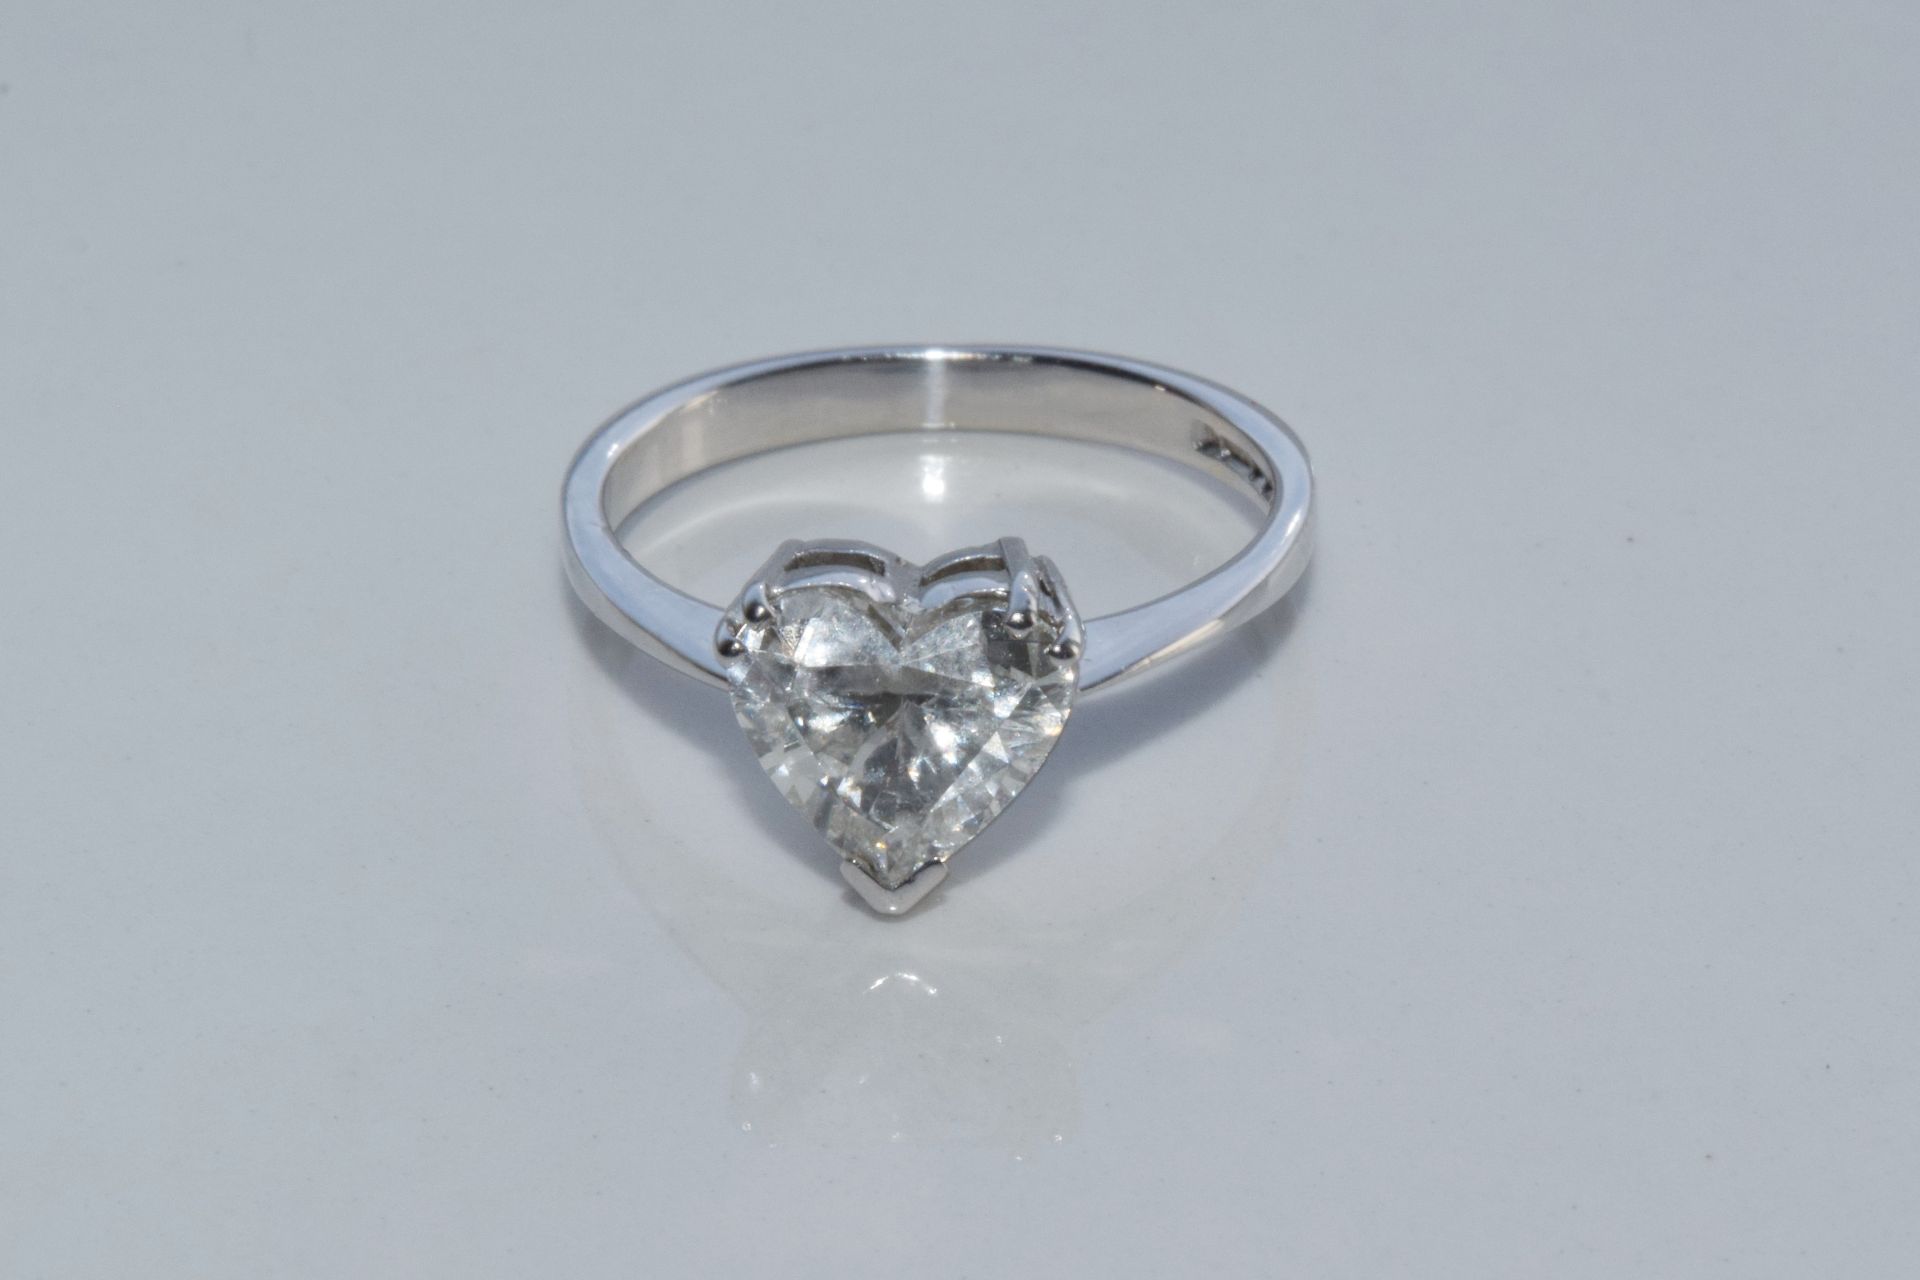 2.16ct Heart cut diamond ring mounted on 18ct white gold band - Image 4 of 5